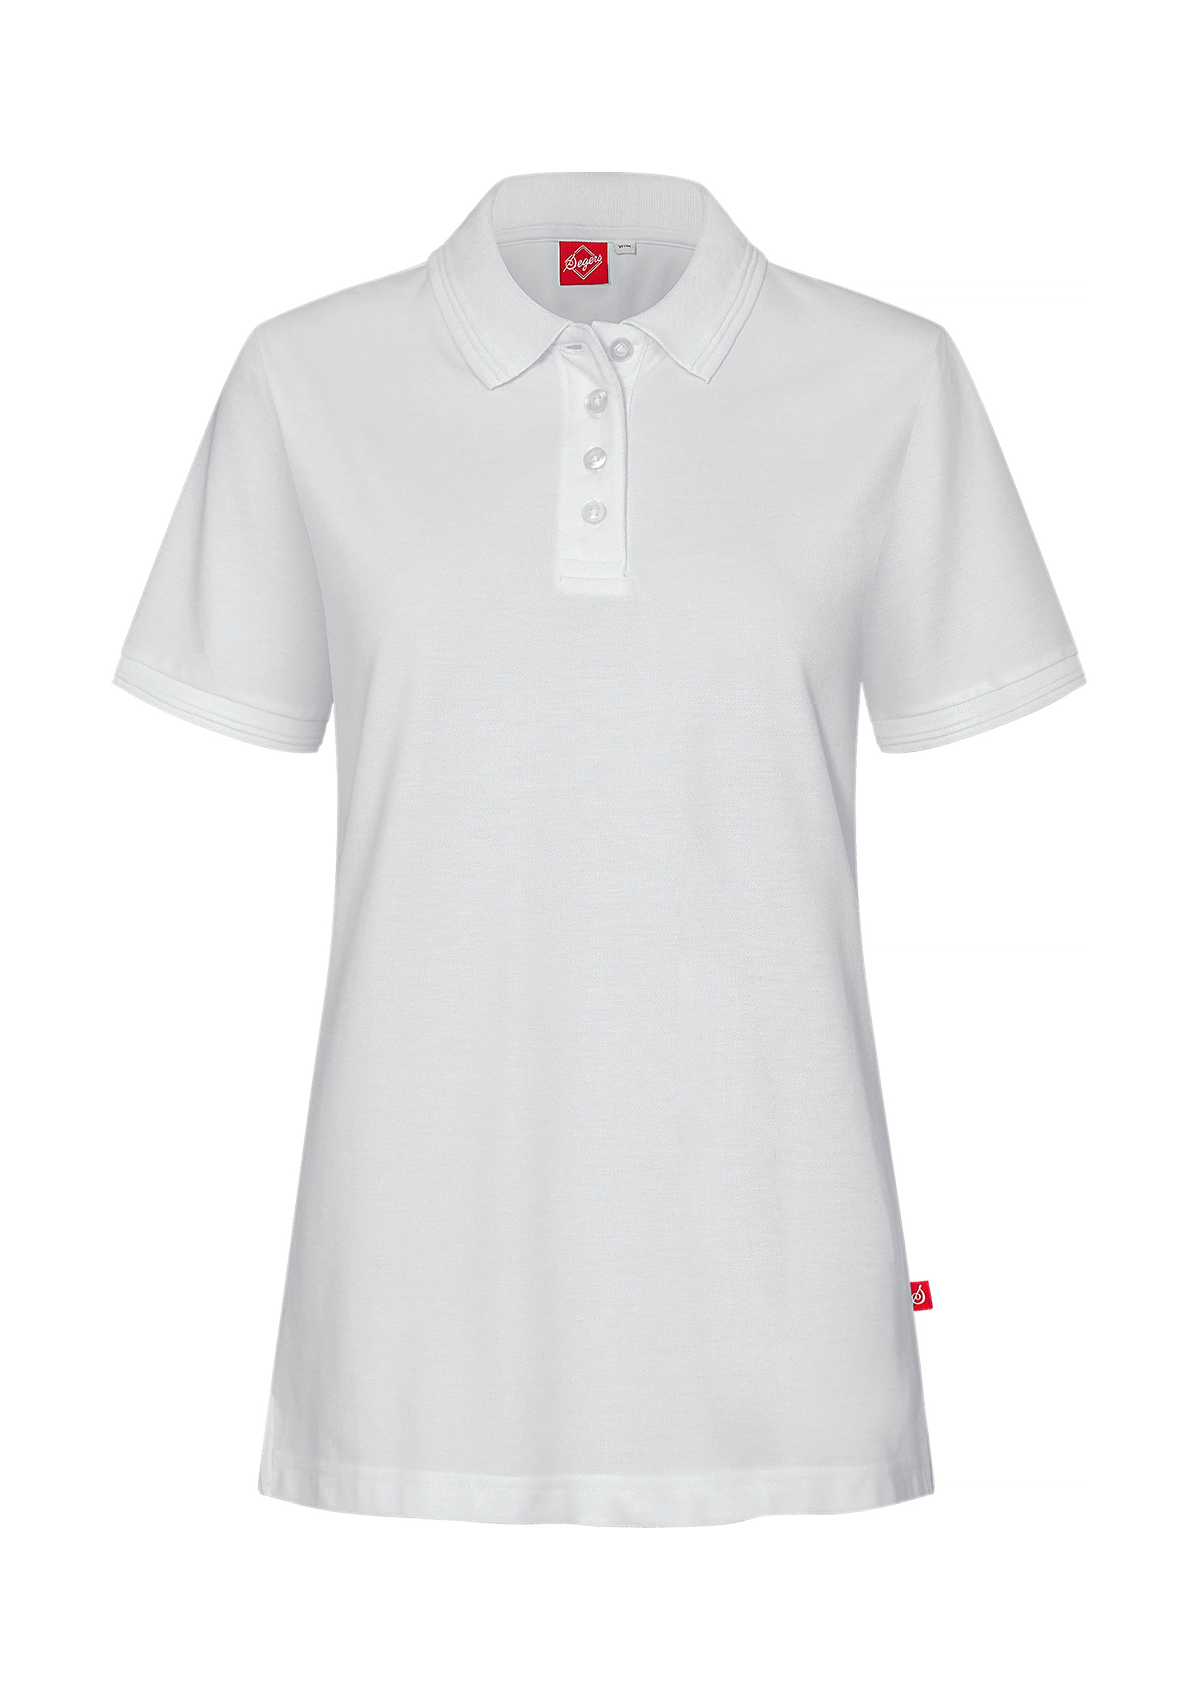 Women's Polo shirt with short sleeves. Segers | Cookniche